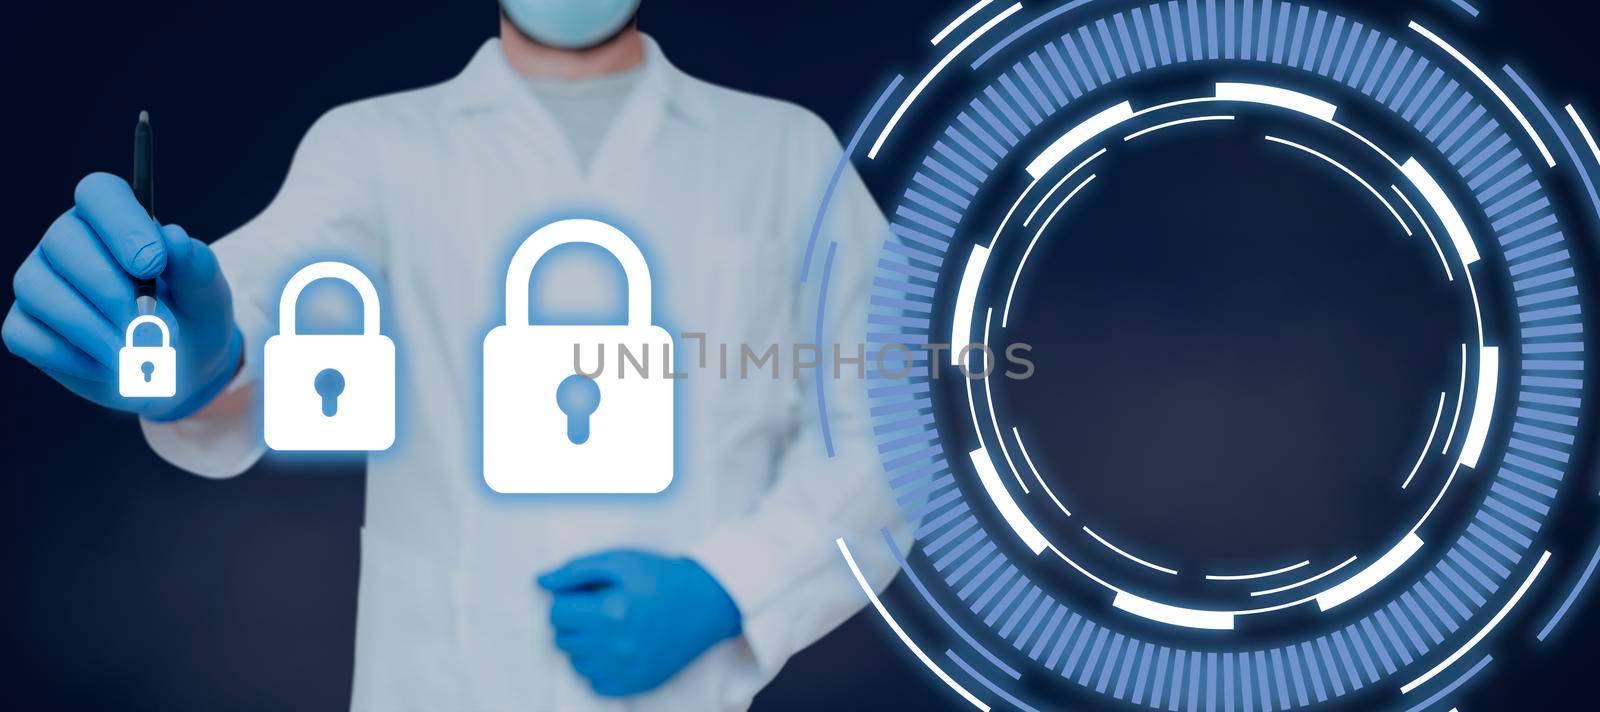 Doctor Holding Pen And Pointing On Digitally Generated Padlocks By Graphical Circle. Scientist Wearing Lab Coat And Glove Presenting Information On Cyber Security. by nialowwa